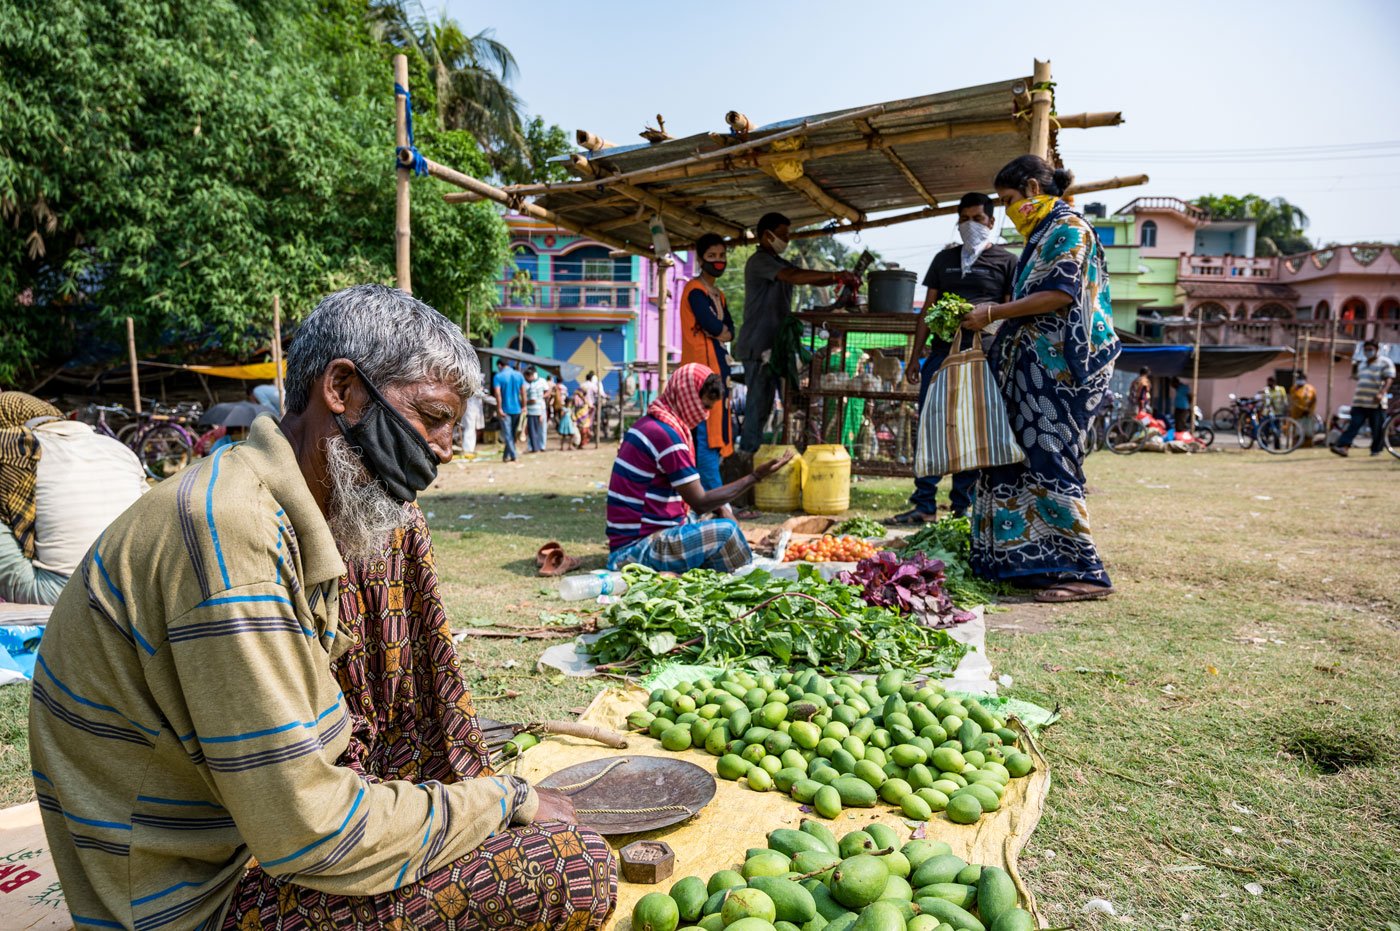 Sadhu Shaikh, 56, has found a spot just off the filed, away from where the other vendors are sitting. He is selling mangoes and vegetables from his own small farmland.

